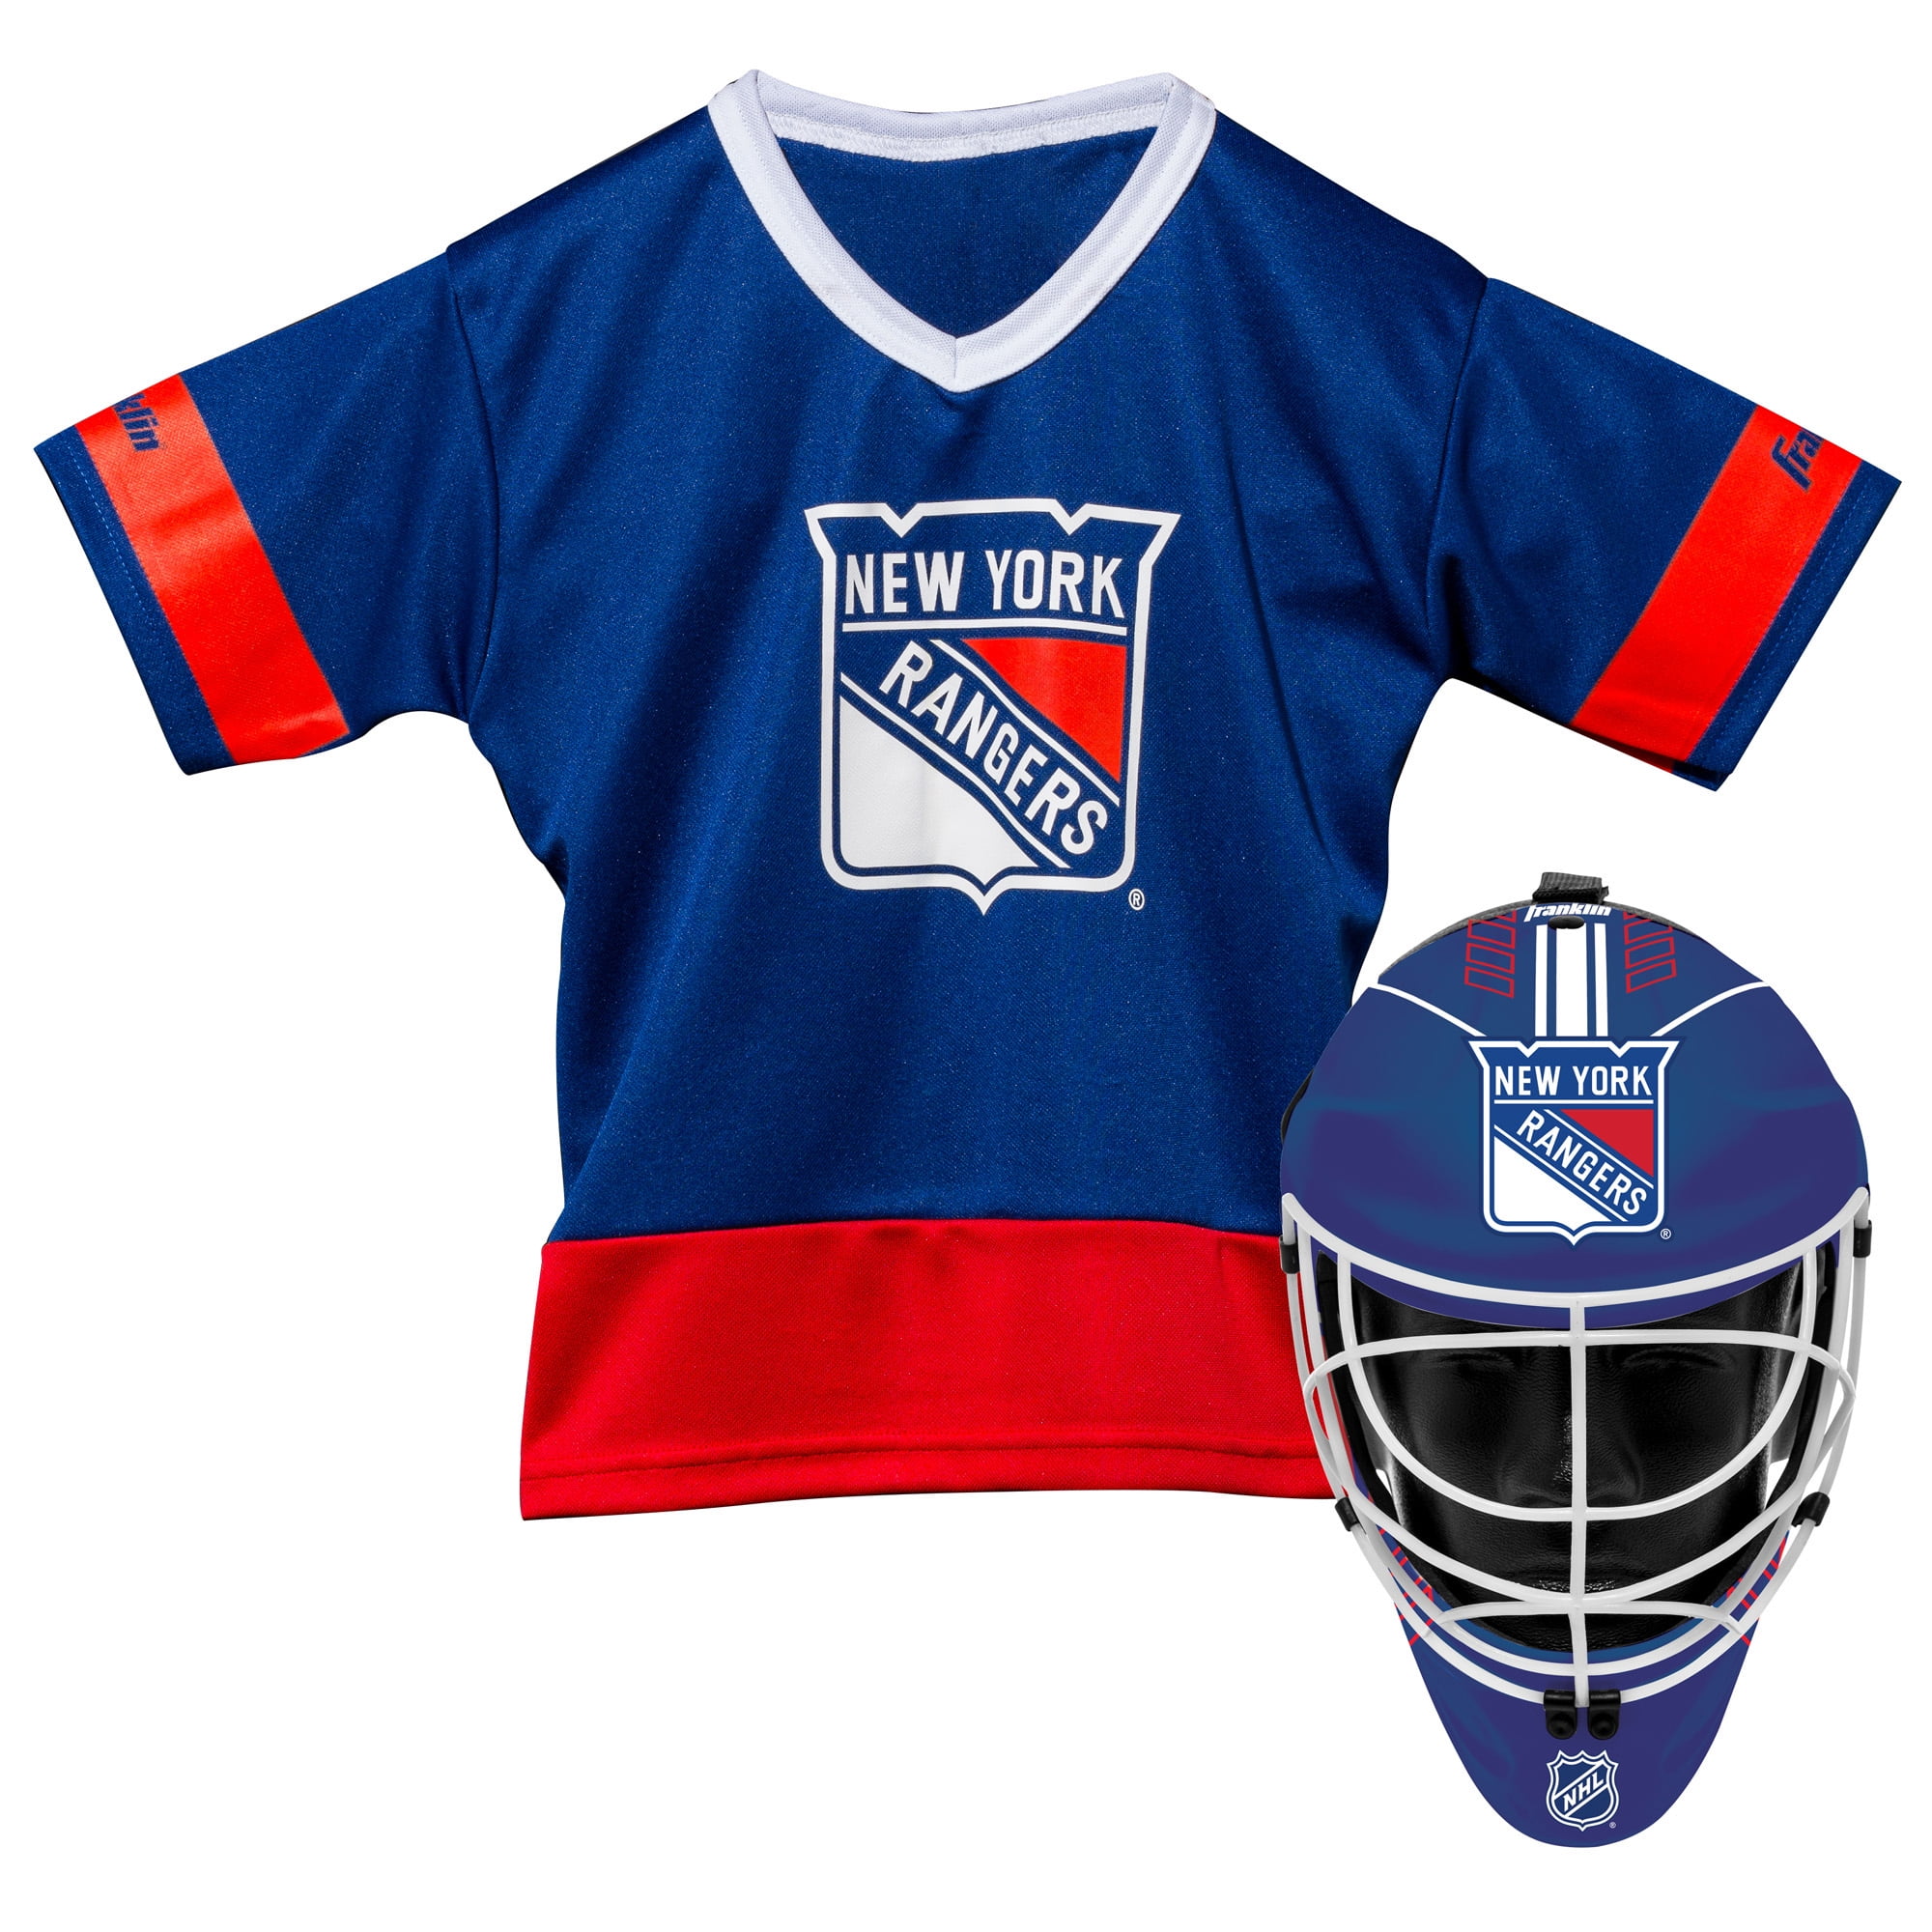 Youth hockey team finds home in N.J., gets uniforms from N.Y. Rangers 